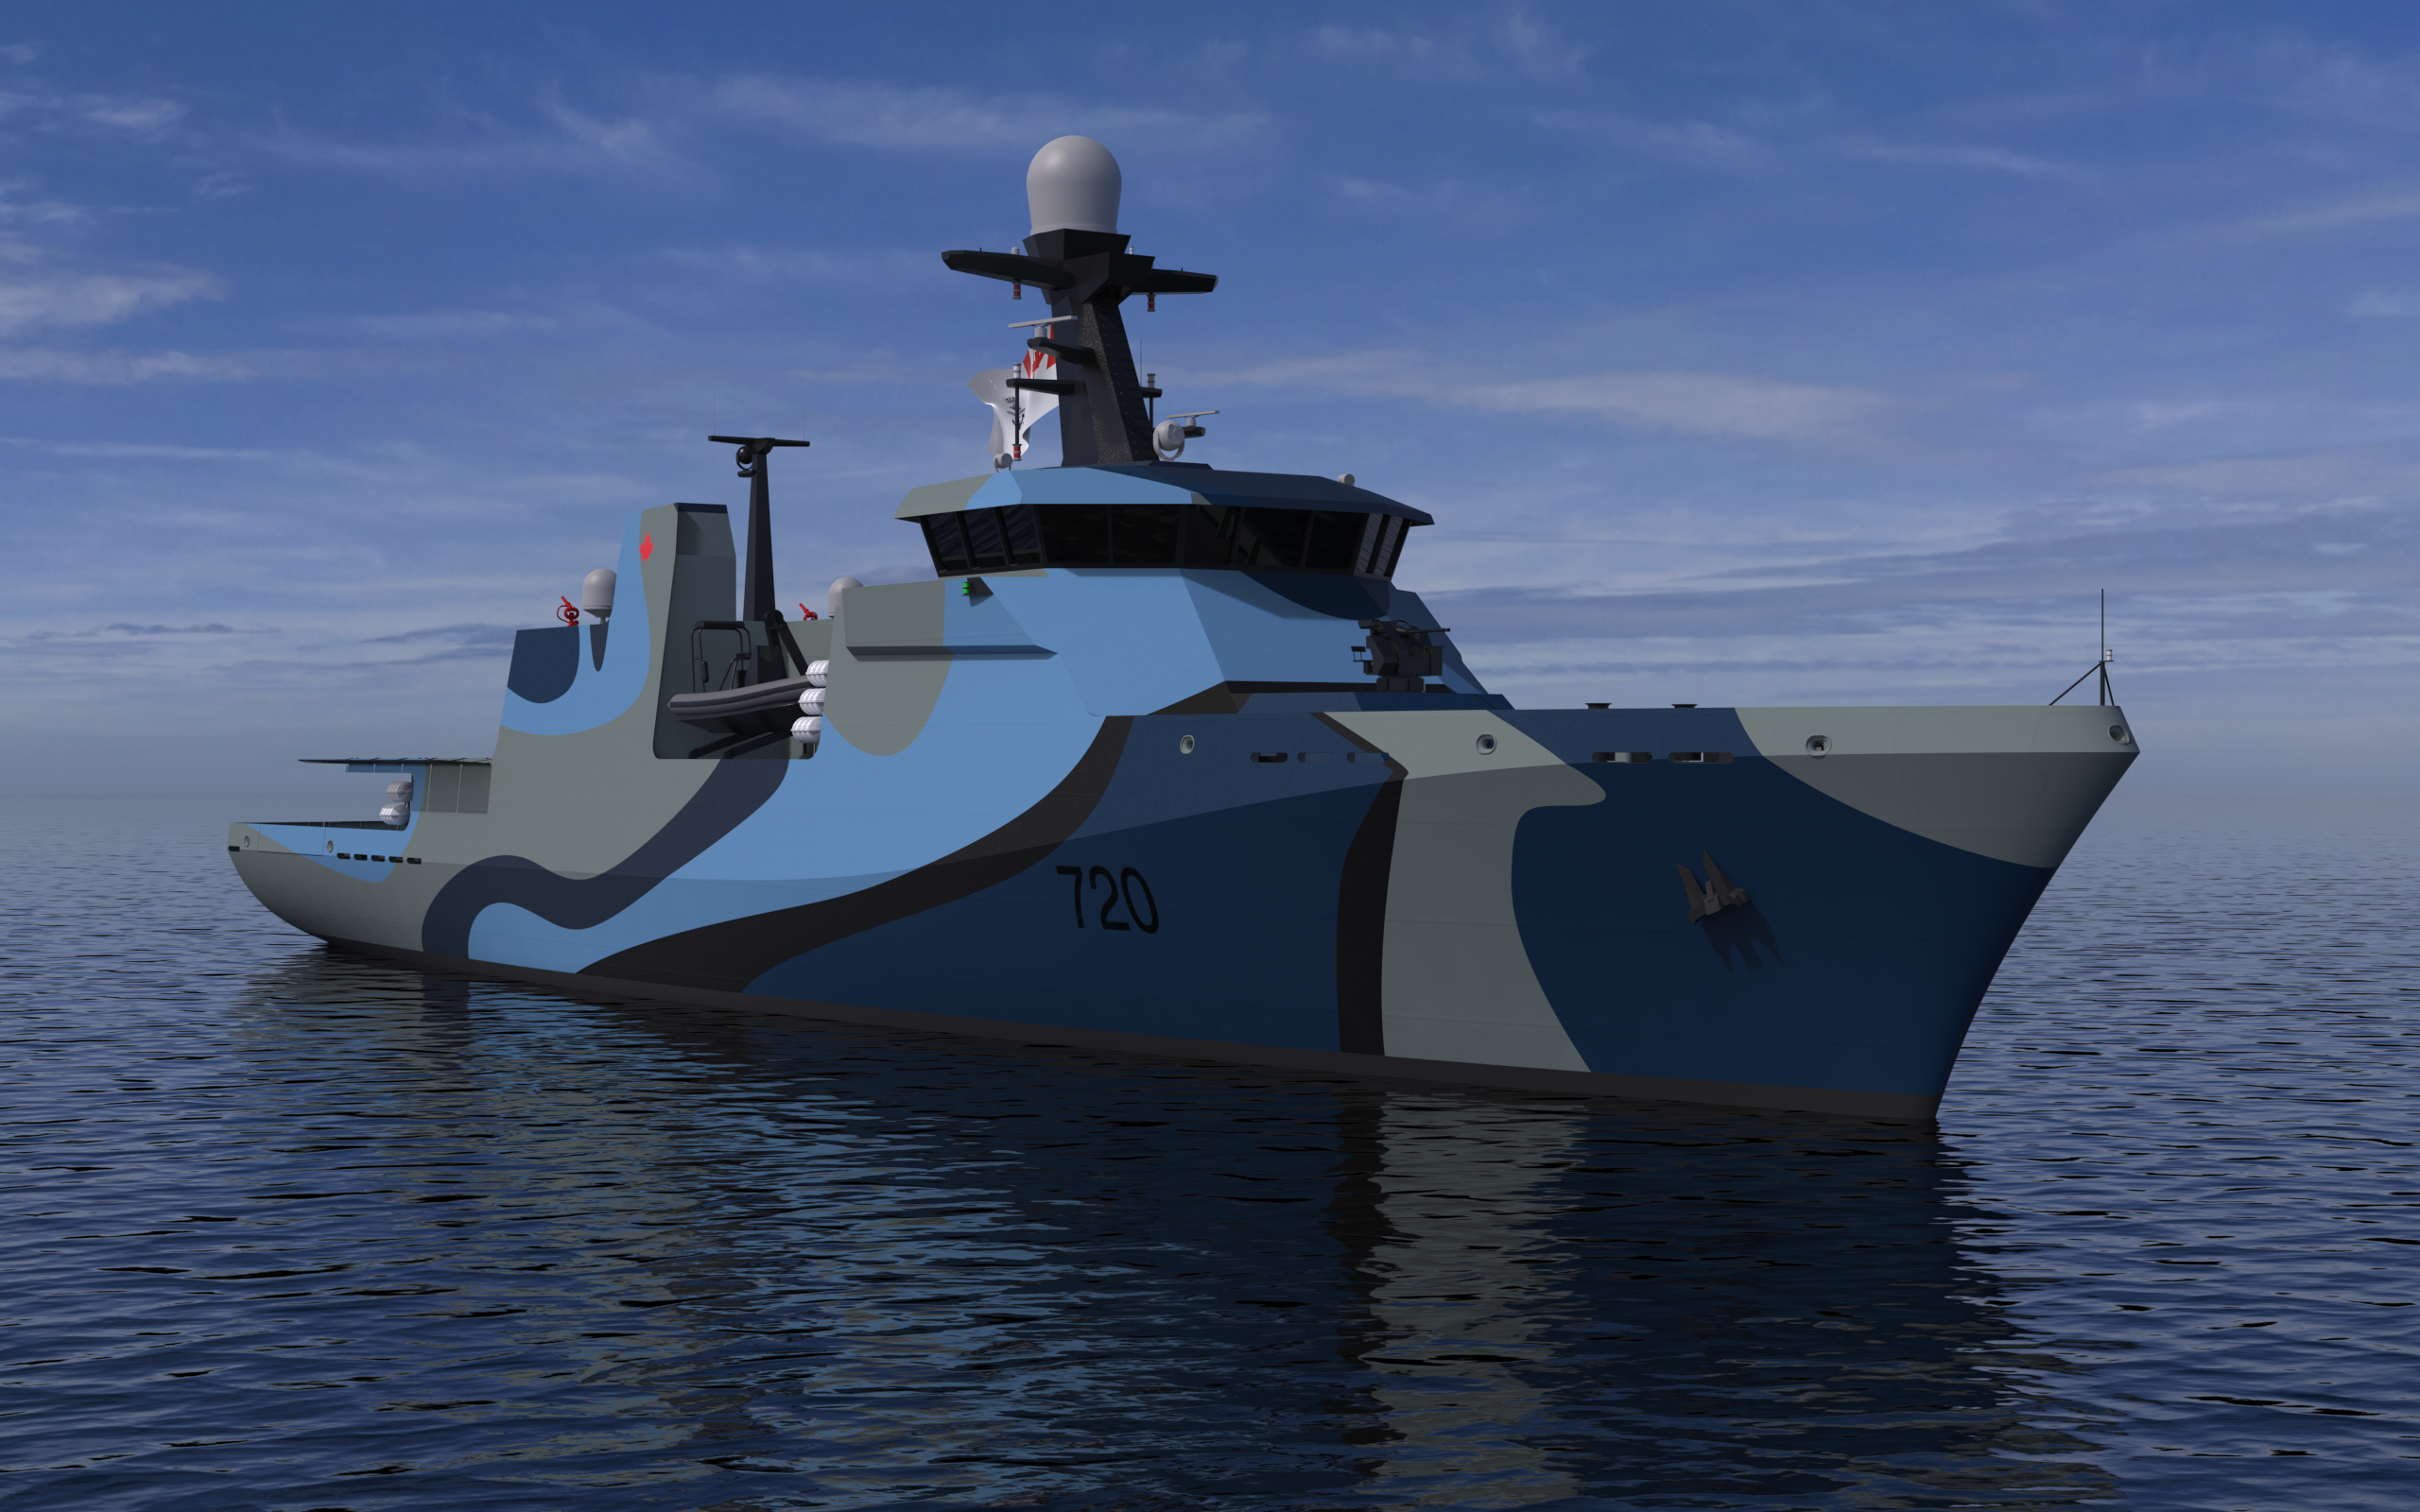 Vard Marine Inc., Introduces an Advanced Offshore Patrol Vessel Designed for the Future Requirements of the Royal Canadian Navy